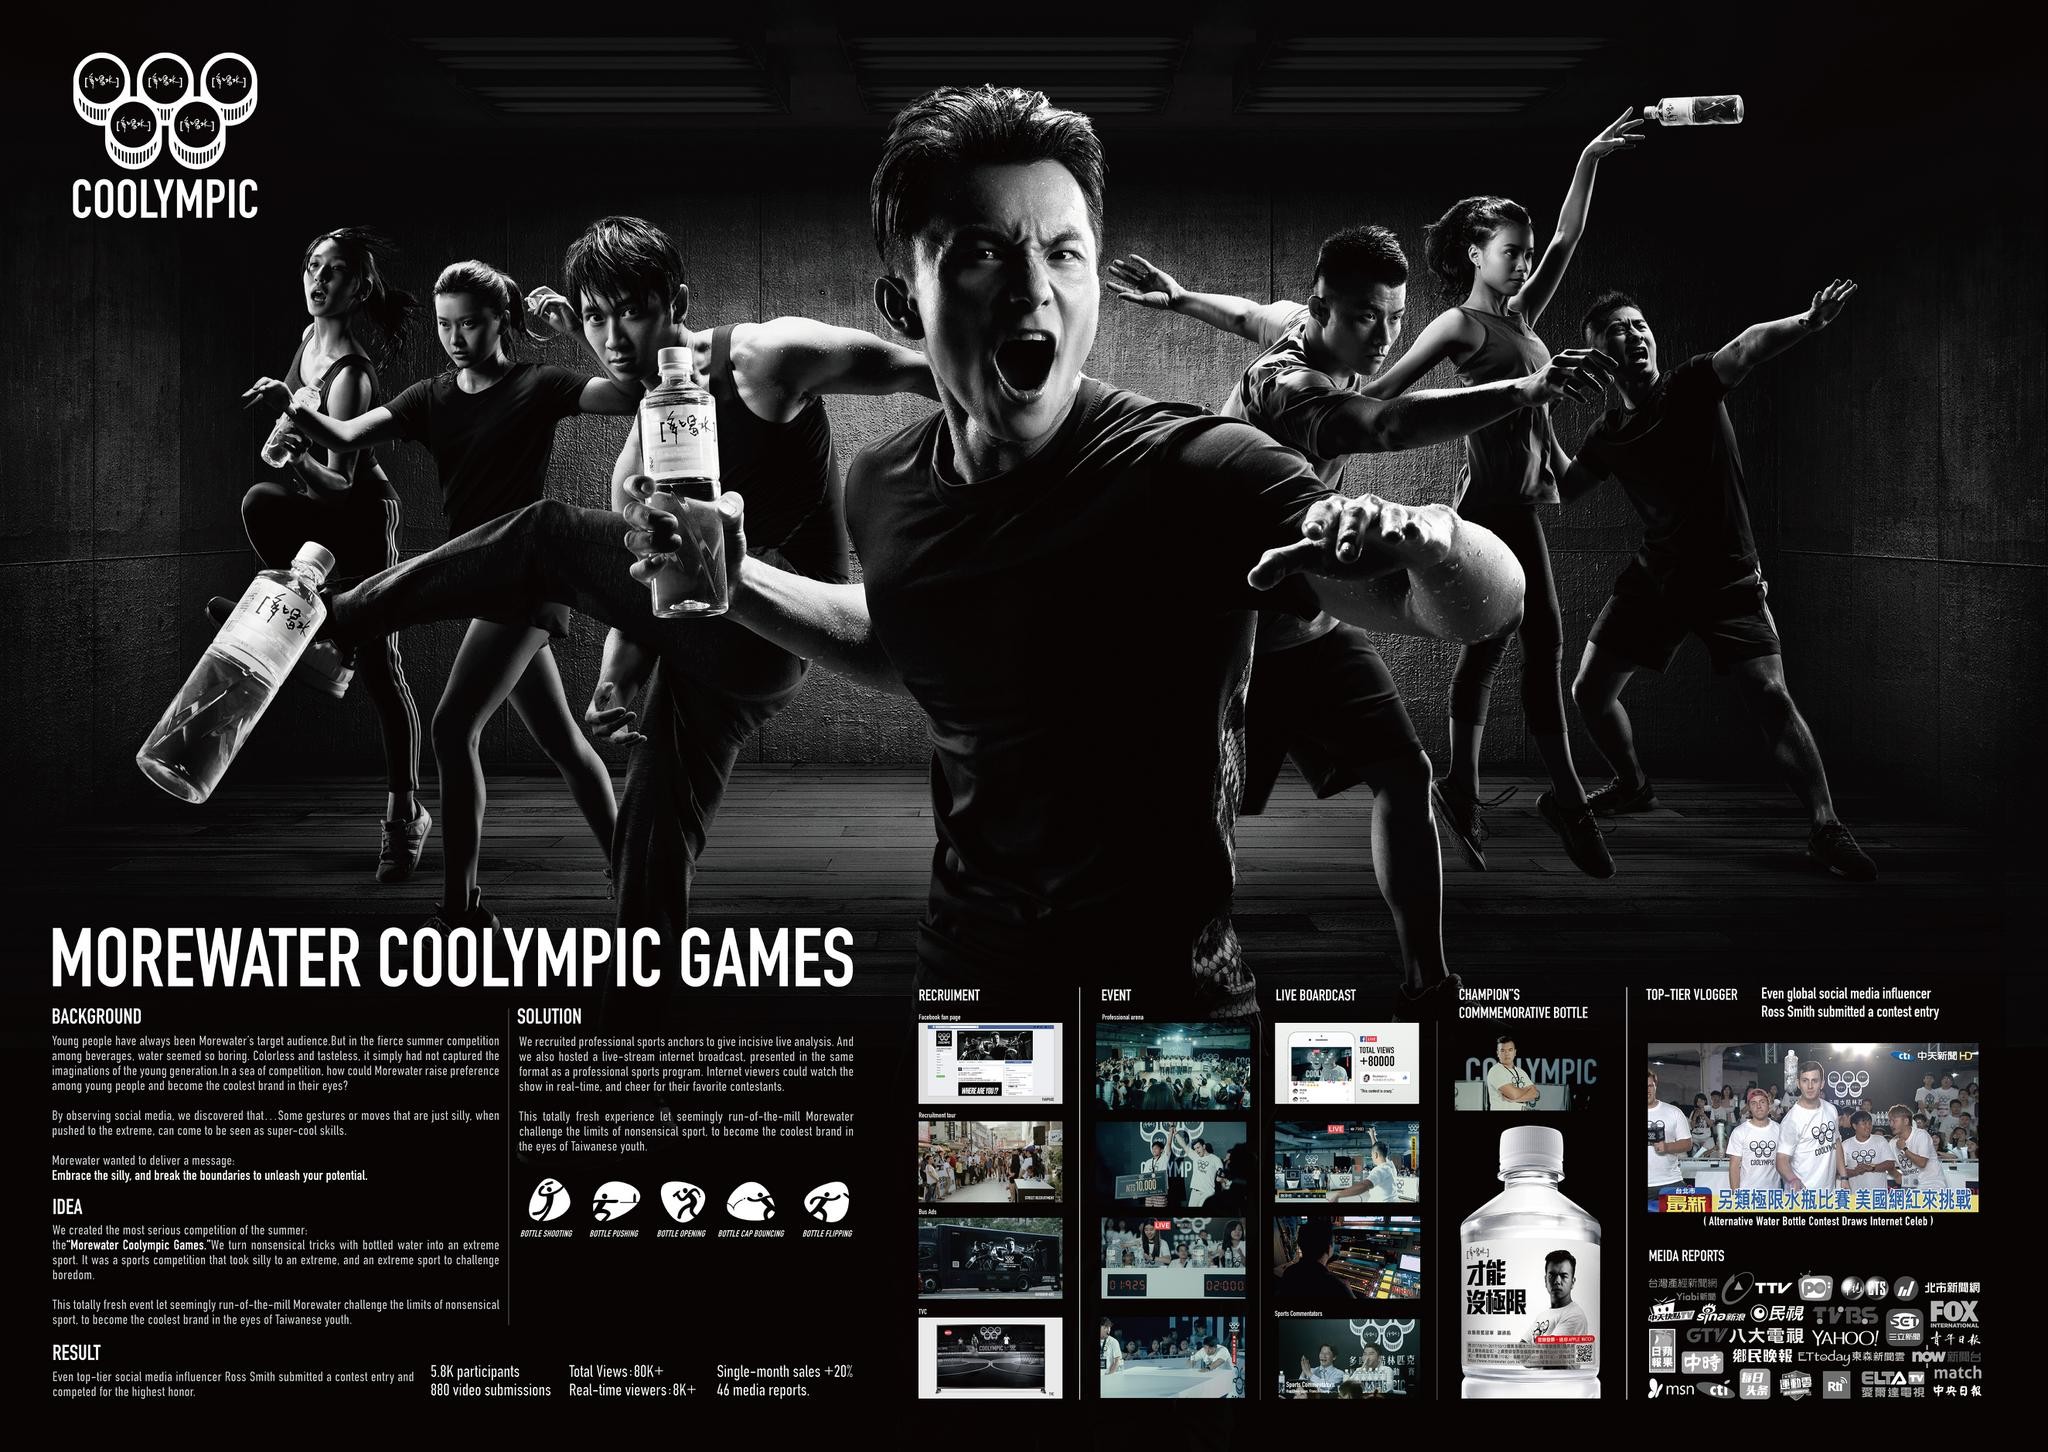 Coolympic Games